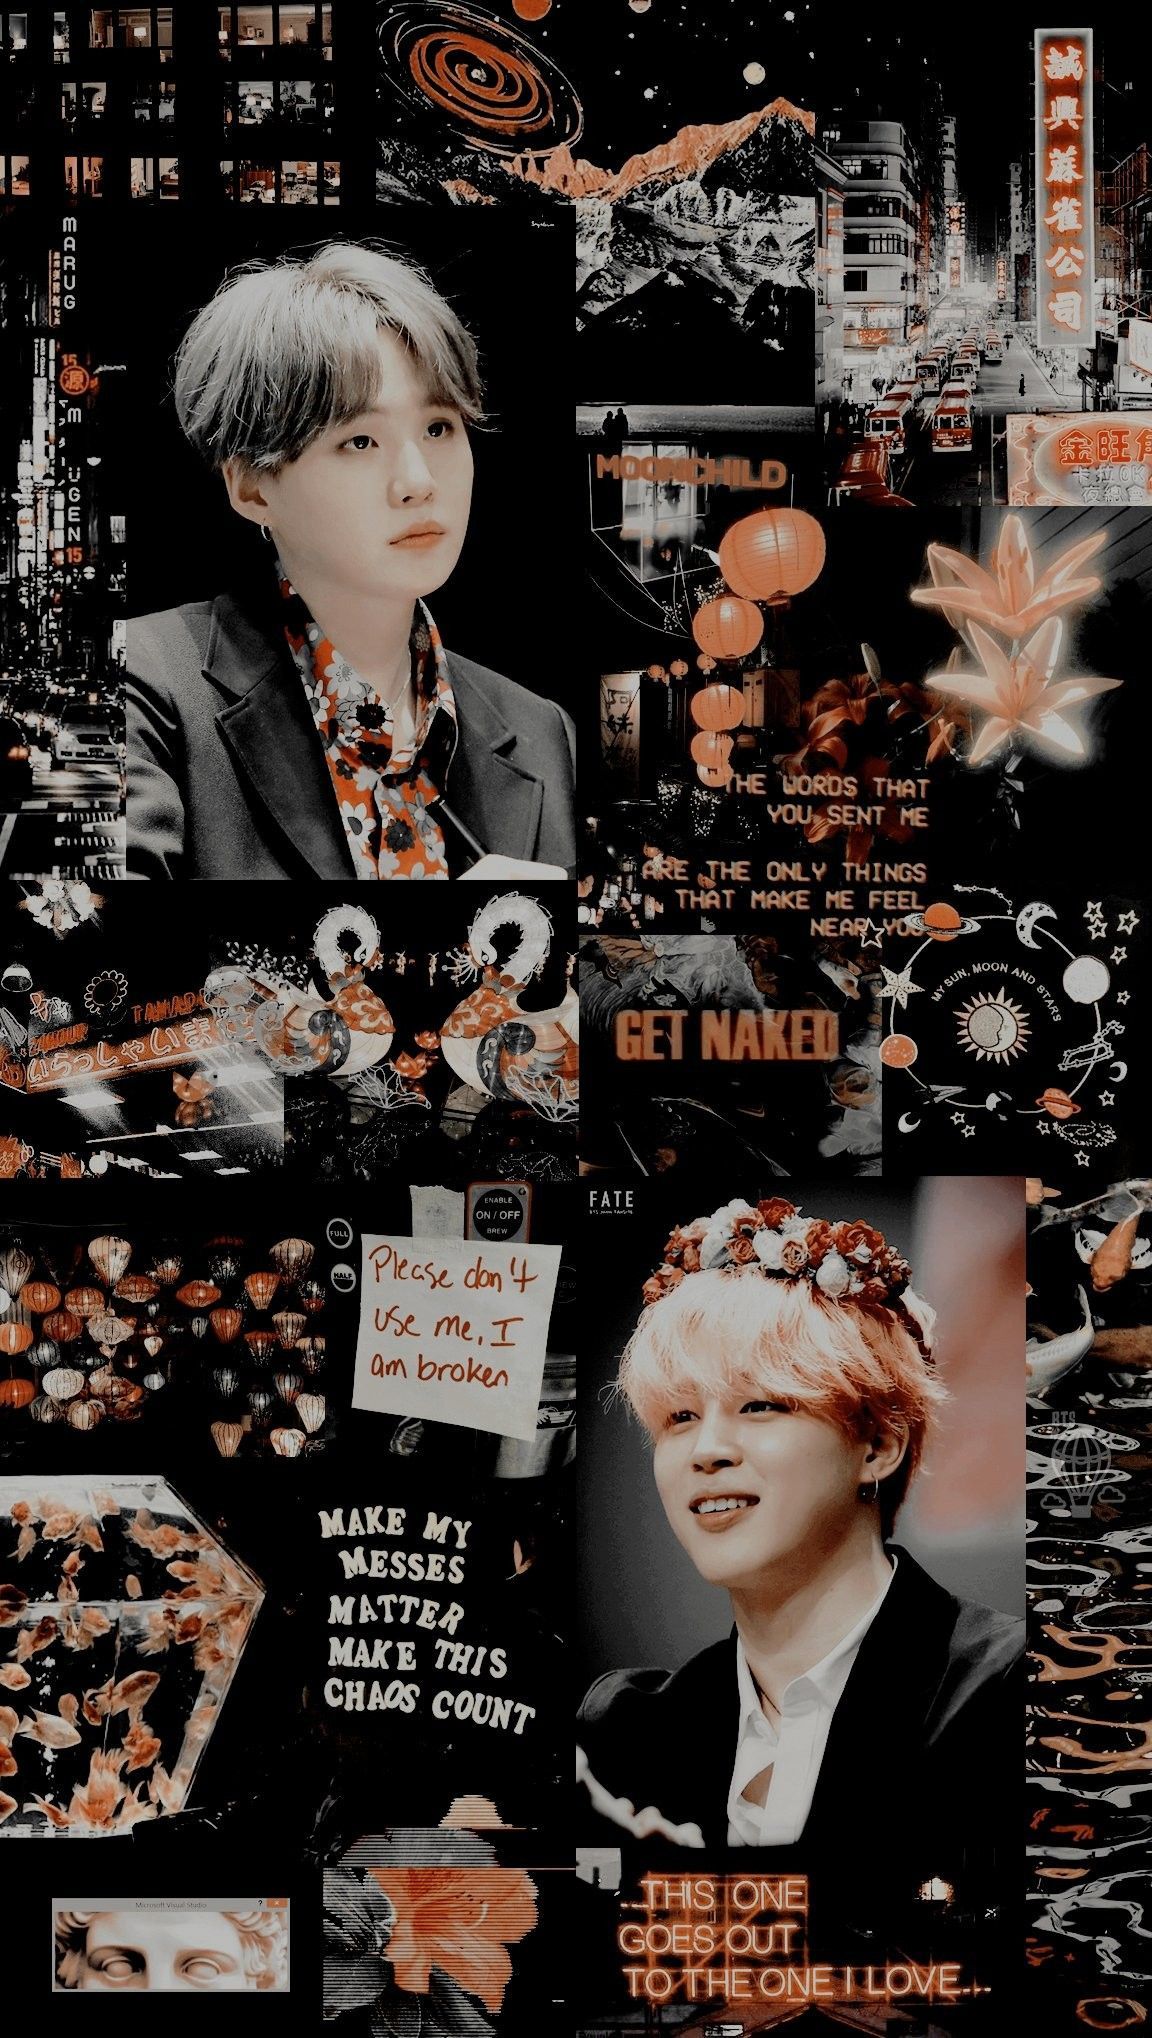 Aesthetic wallpaper of Yoonmin from BTS with quotes and images. - Suga